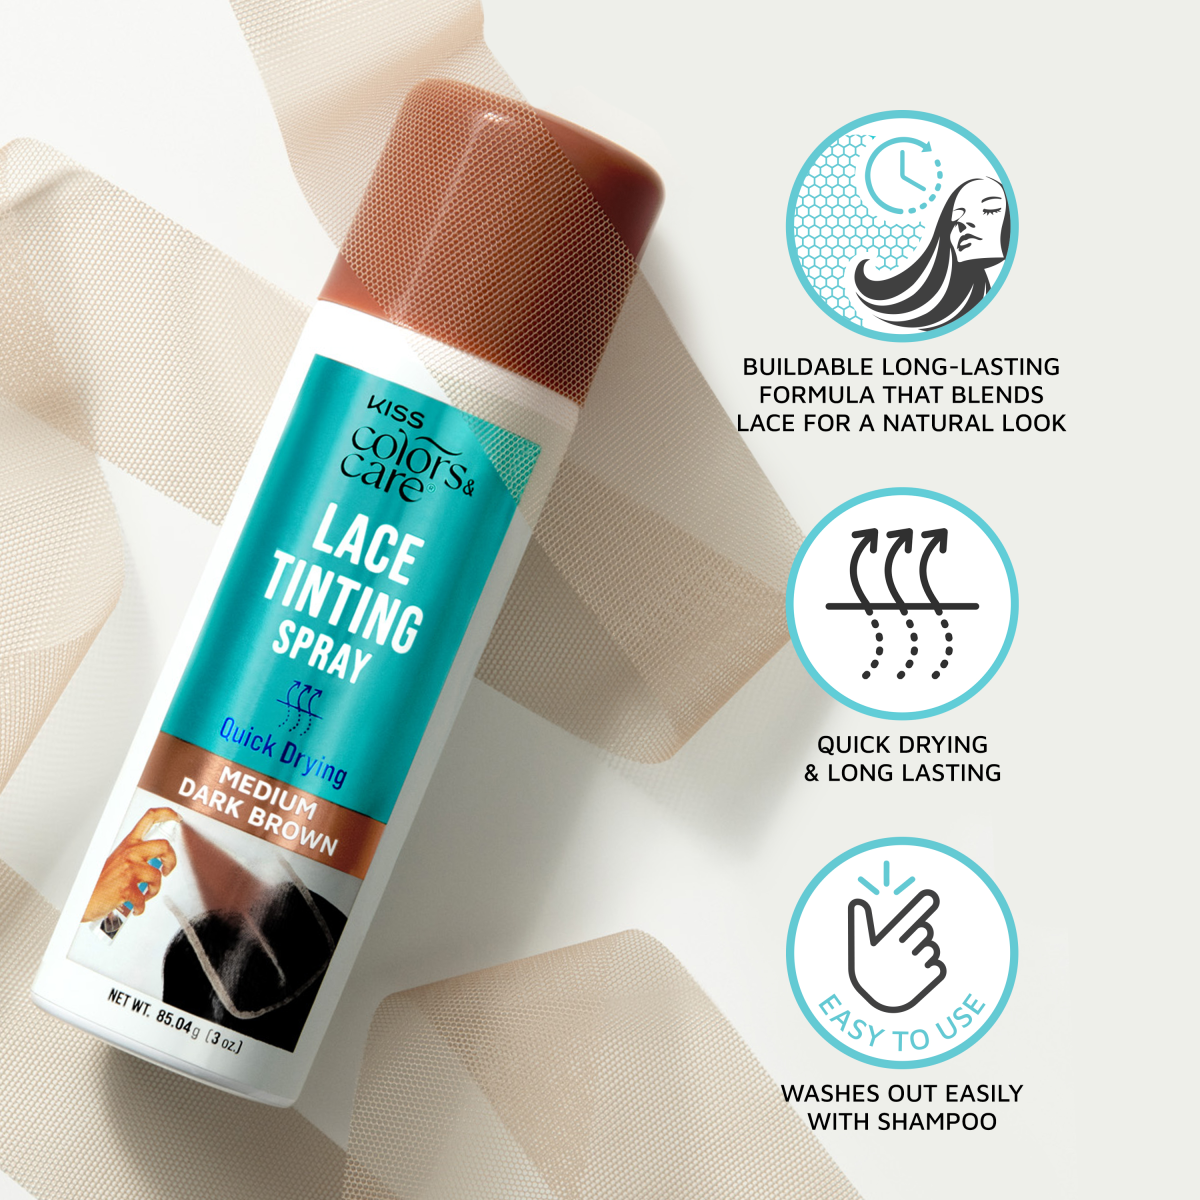 KISS Colors &amp; Care Lace Tinting Spray - Dark Brown